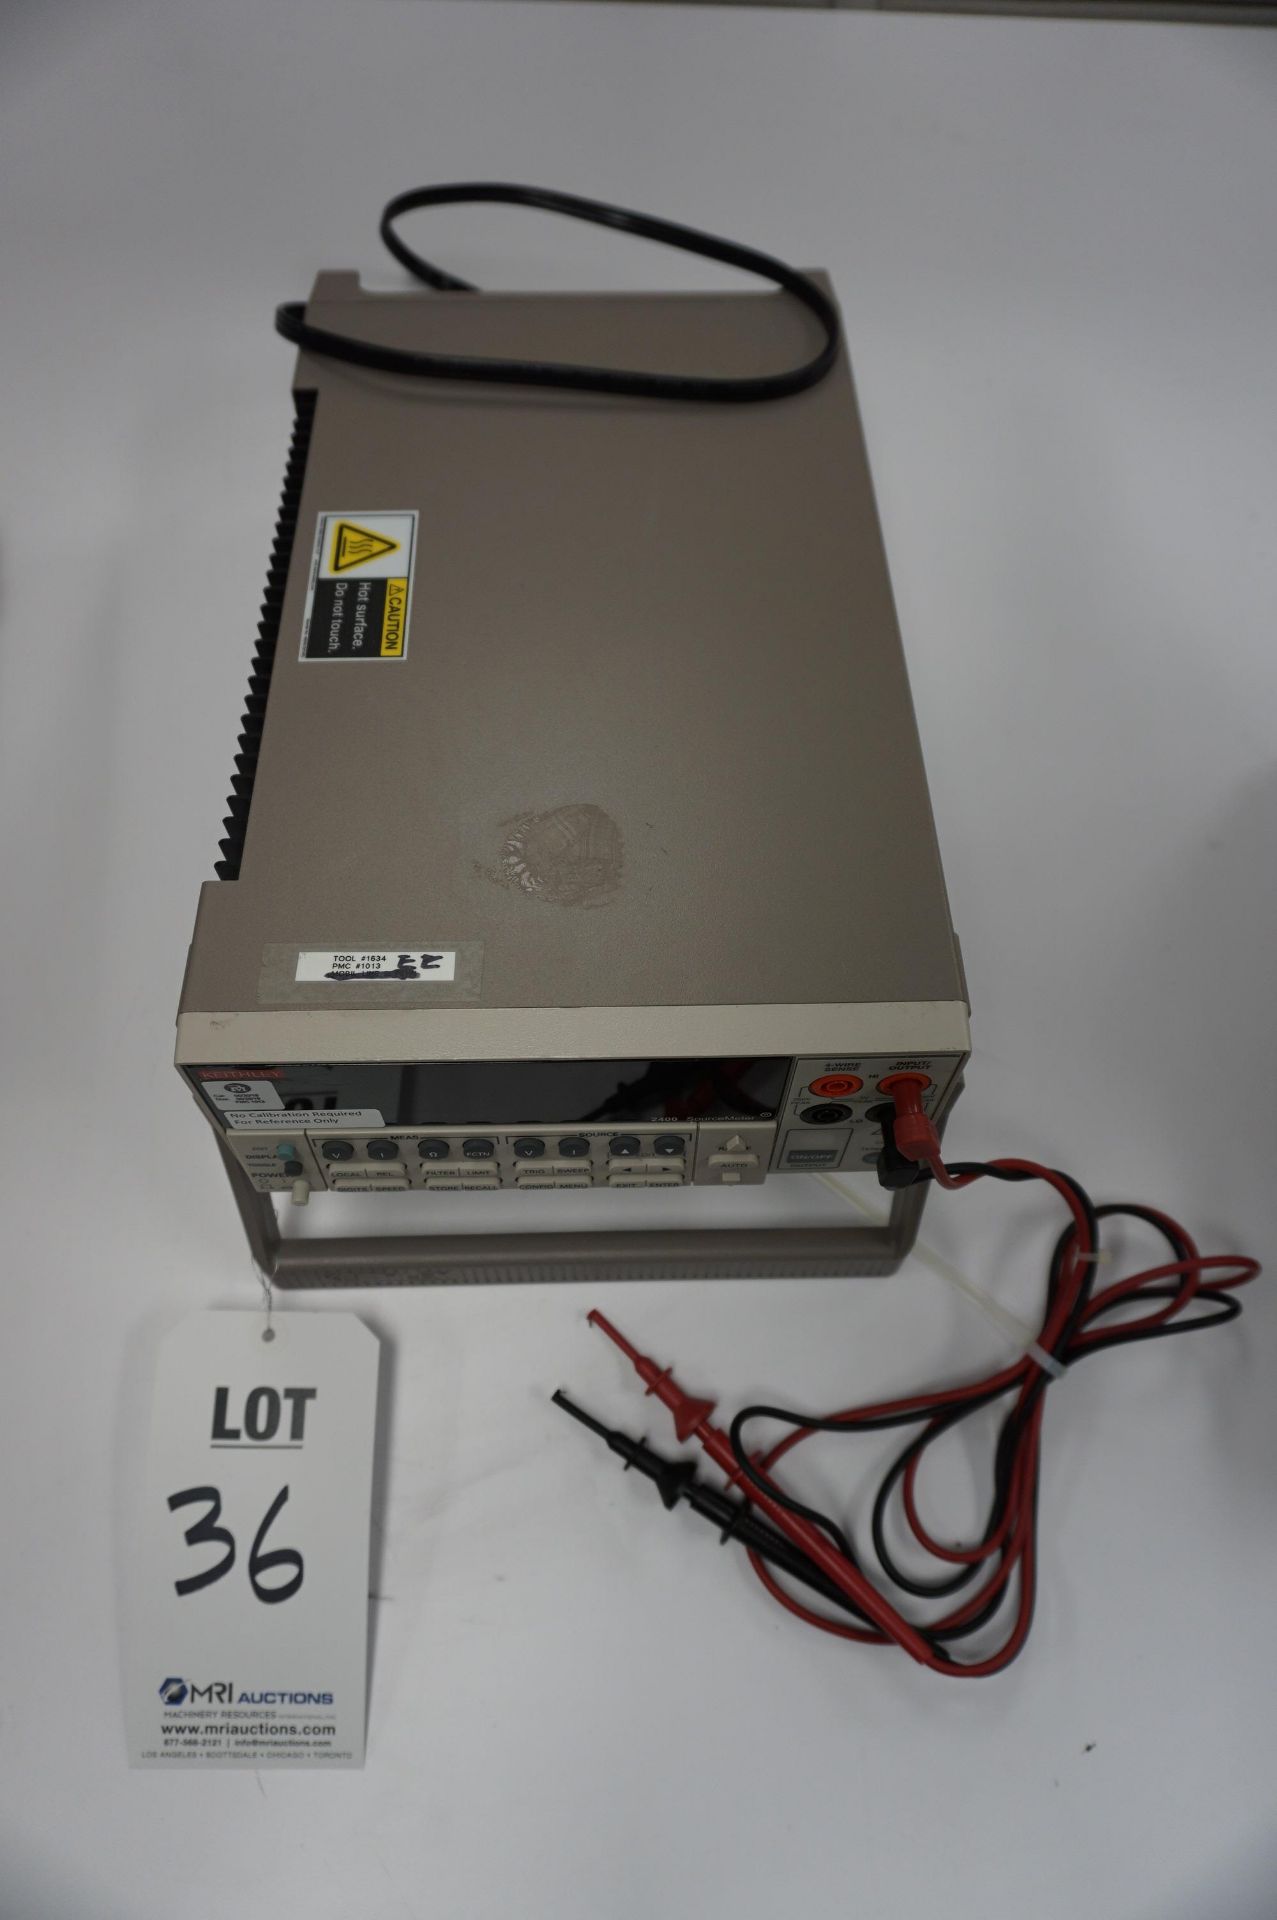 KEITHLY 2400 SOURCE METER, S/N 1238978, WITH POWER CABLE AND TESTERS - Image 2 of 3